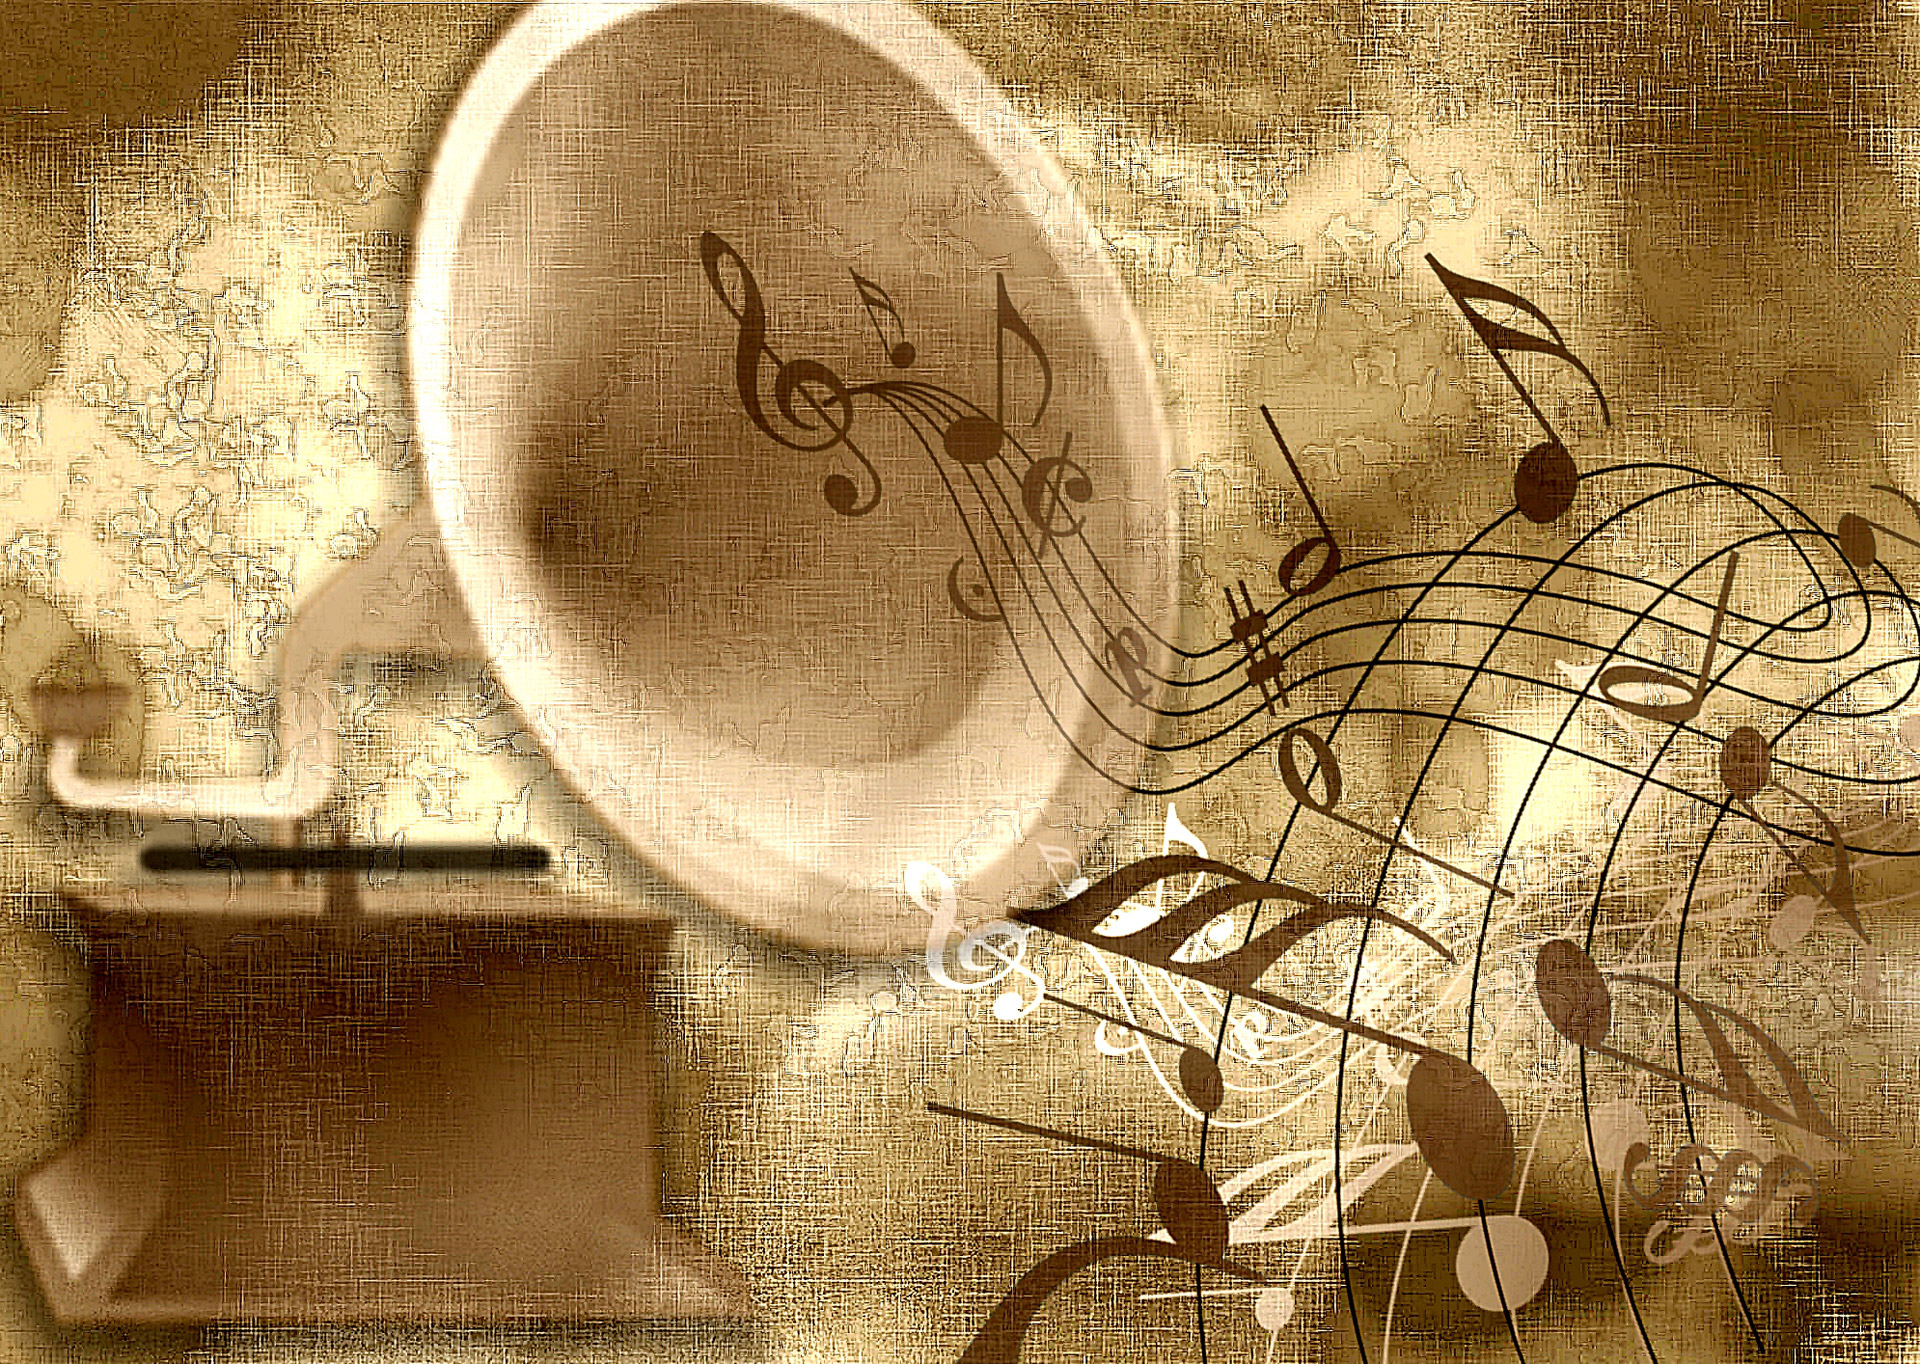 background sauermaul oldies music picture free photo